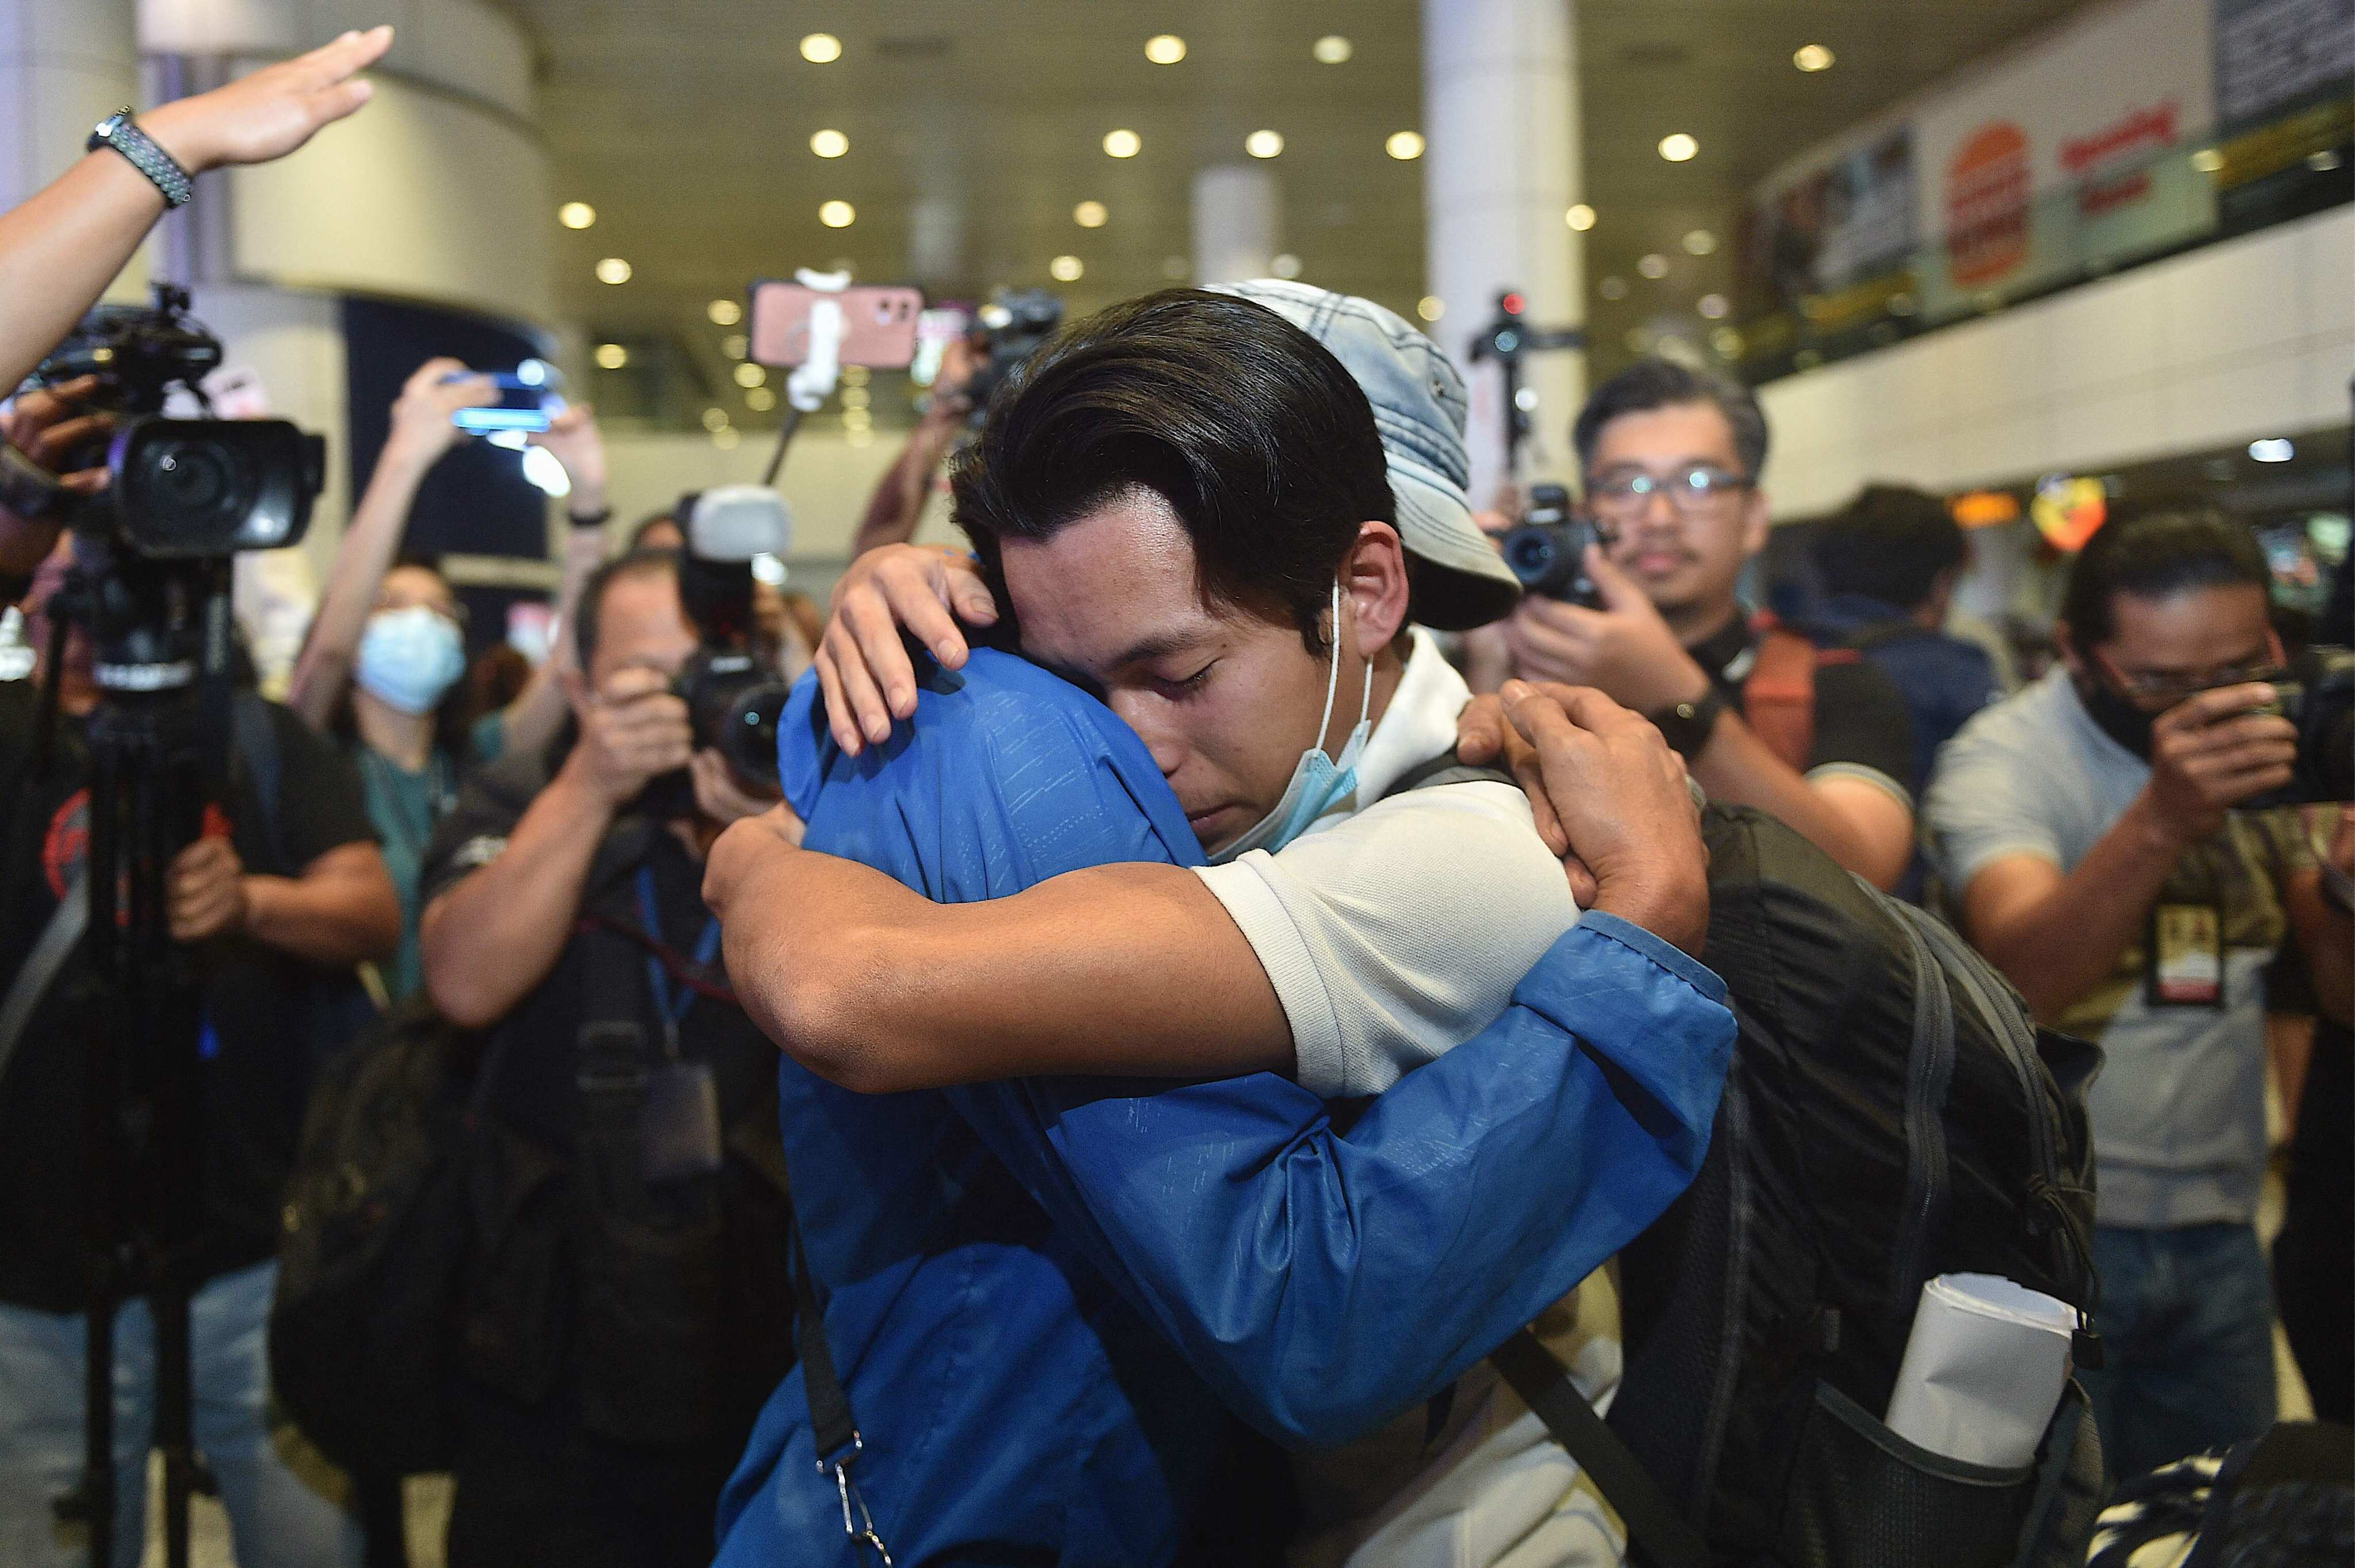 One of the group of six Malaysian men (right) rescued from a human trafficking syndicate in Myanmar is given a hug upon arrival at Kuala Lumpur International Airport in Sepang on December 21, 2022. The men said they were duped by the syndicate to work in Myanmar with promises of high salaries through job advertisements on social media. Photo: AFP